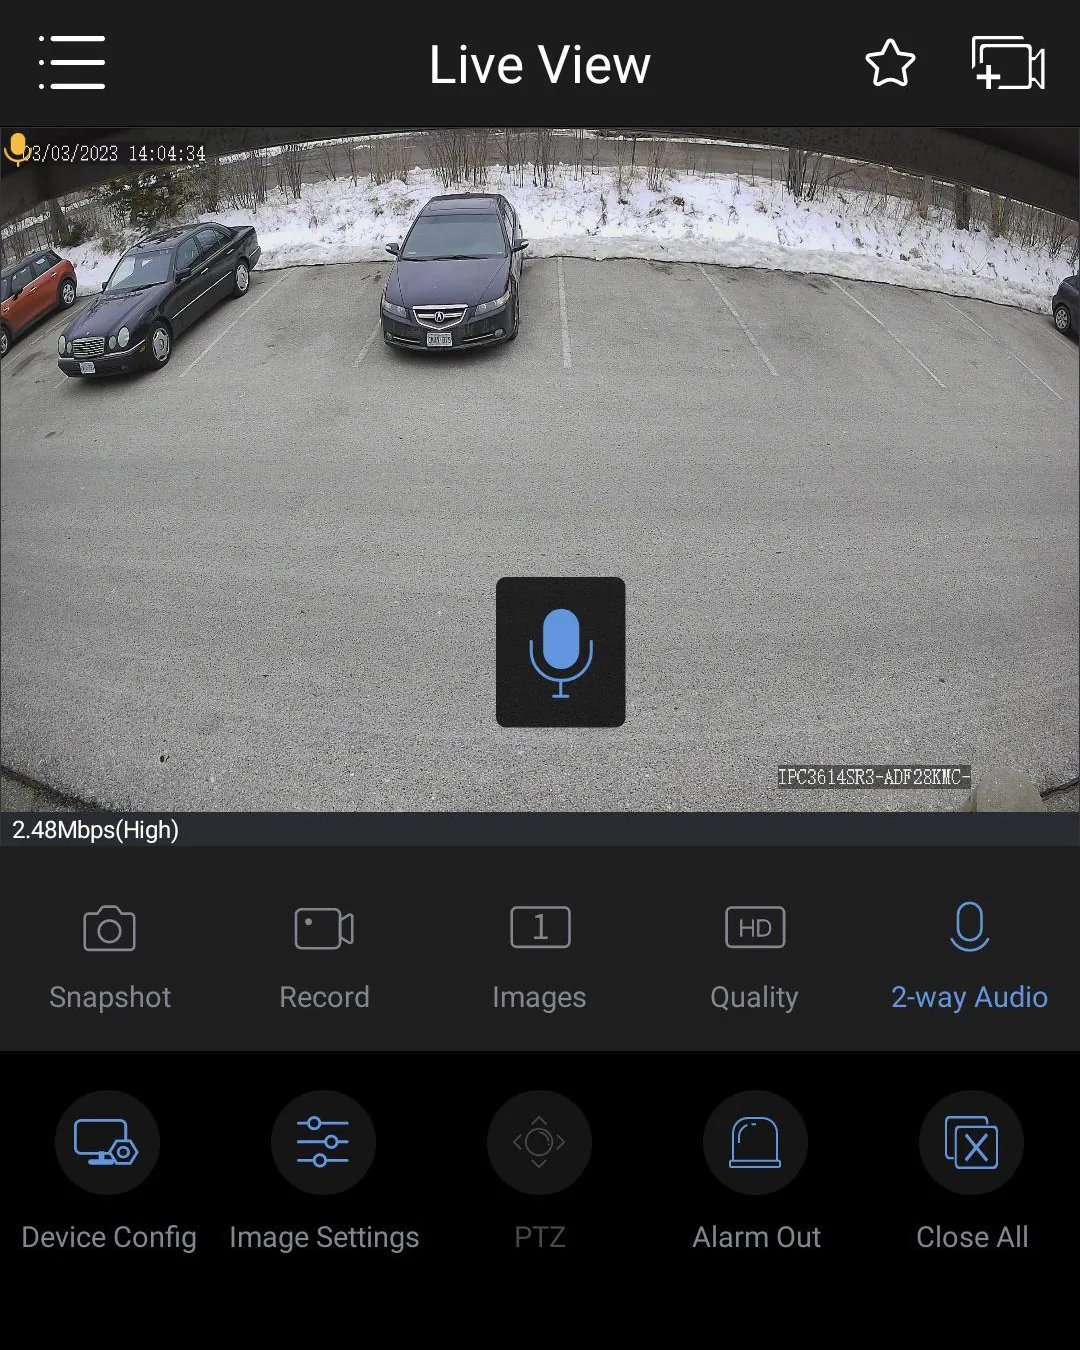 EZView App on smartphone showing two-way audio feature being used